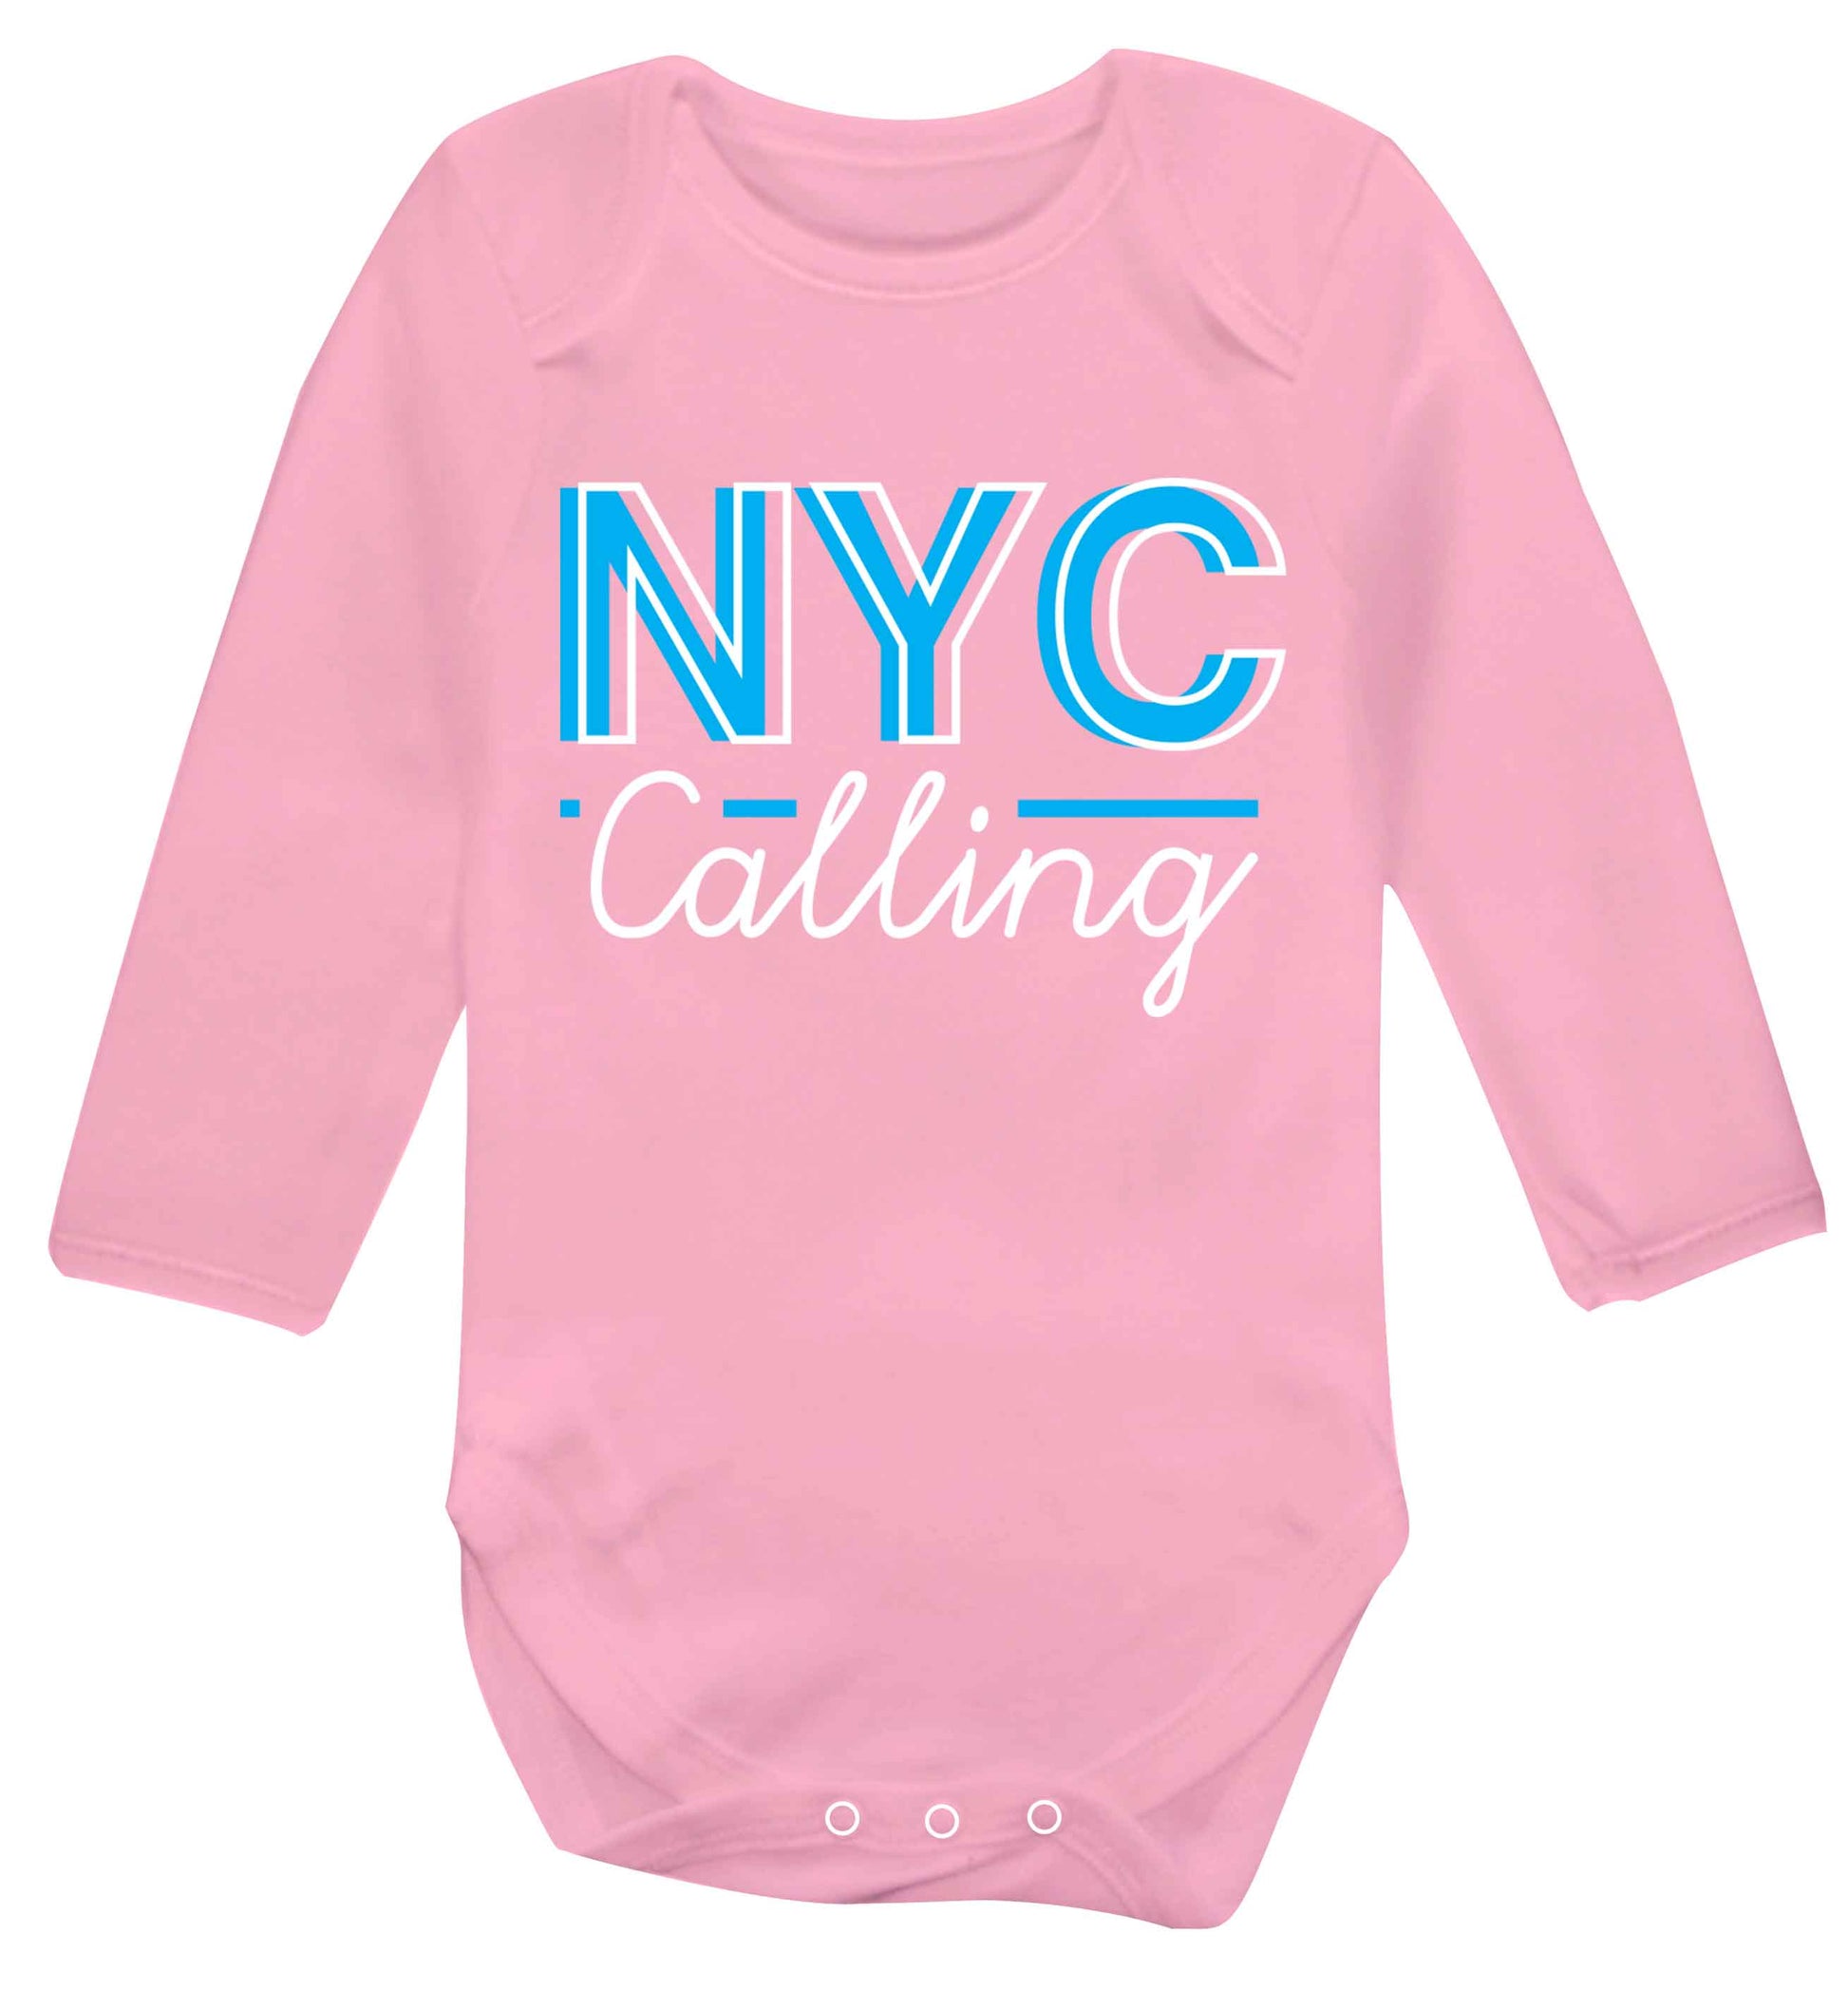 NYC calling Baby Vest long sleeved pale pink 6-12 months